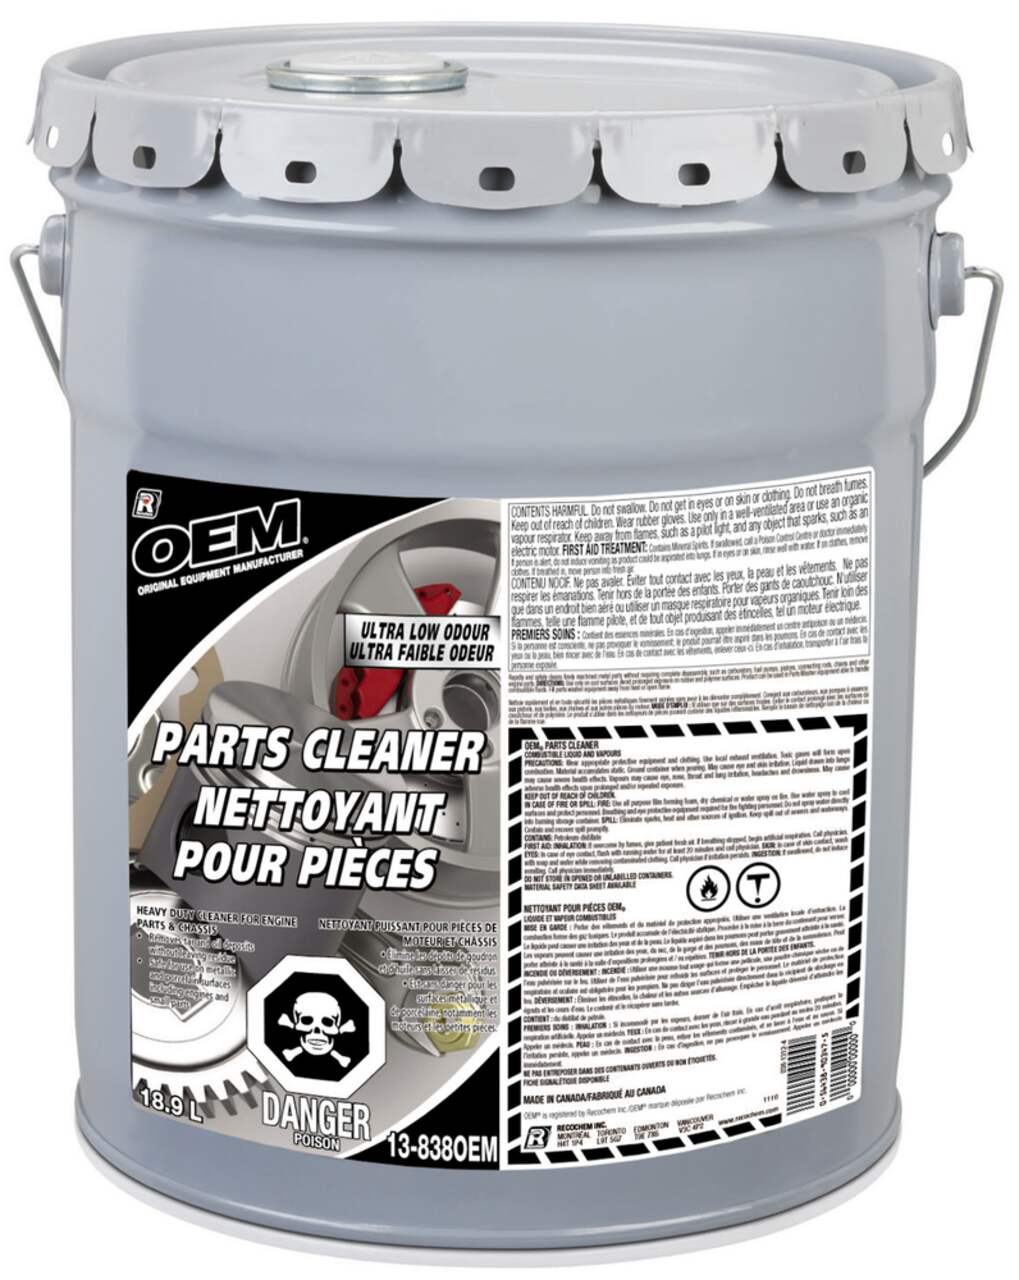 Turbo Power Parts Cleaner, 18.9-L